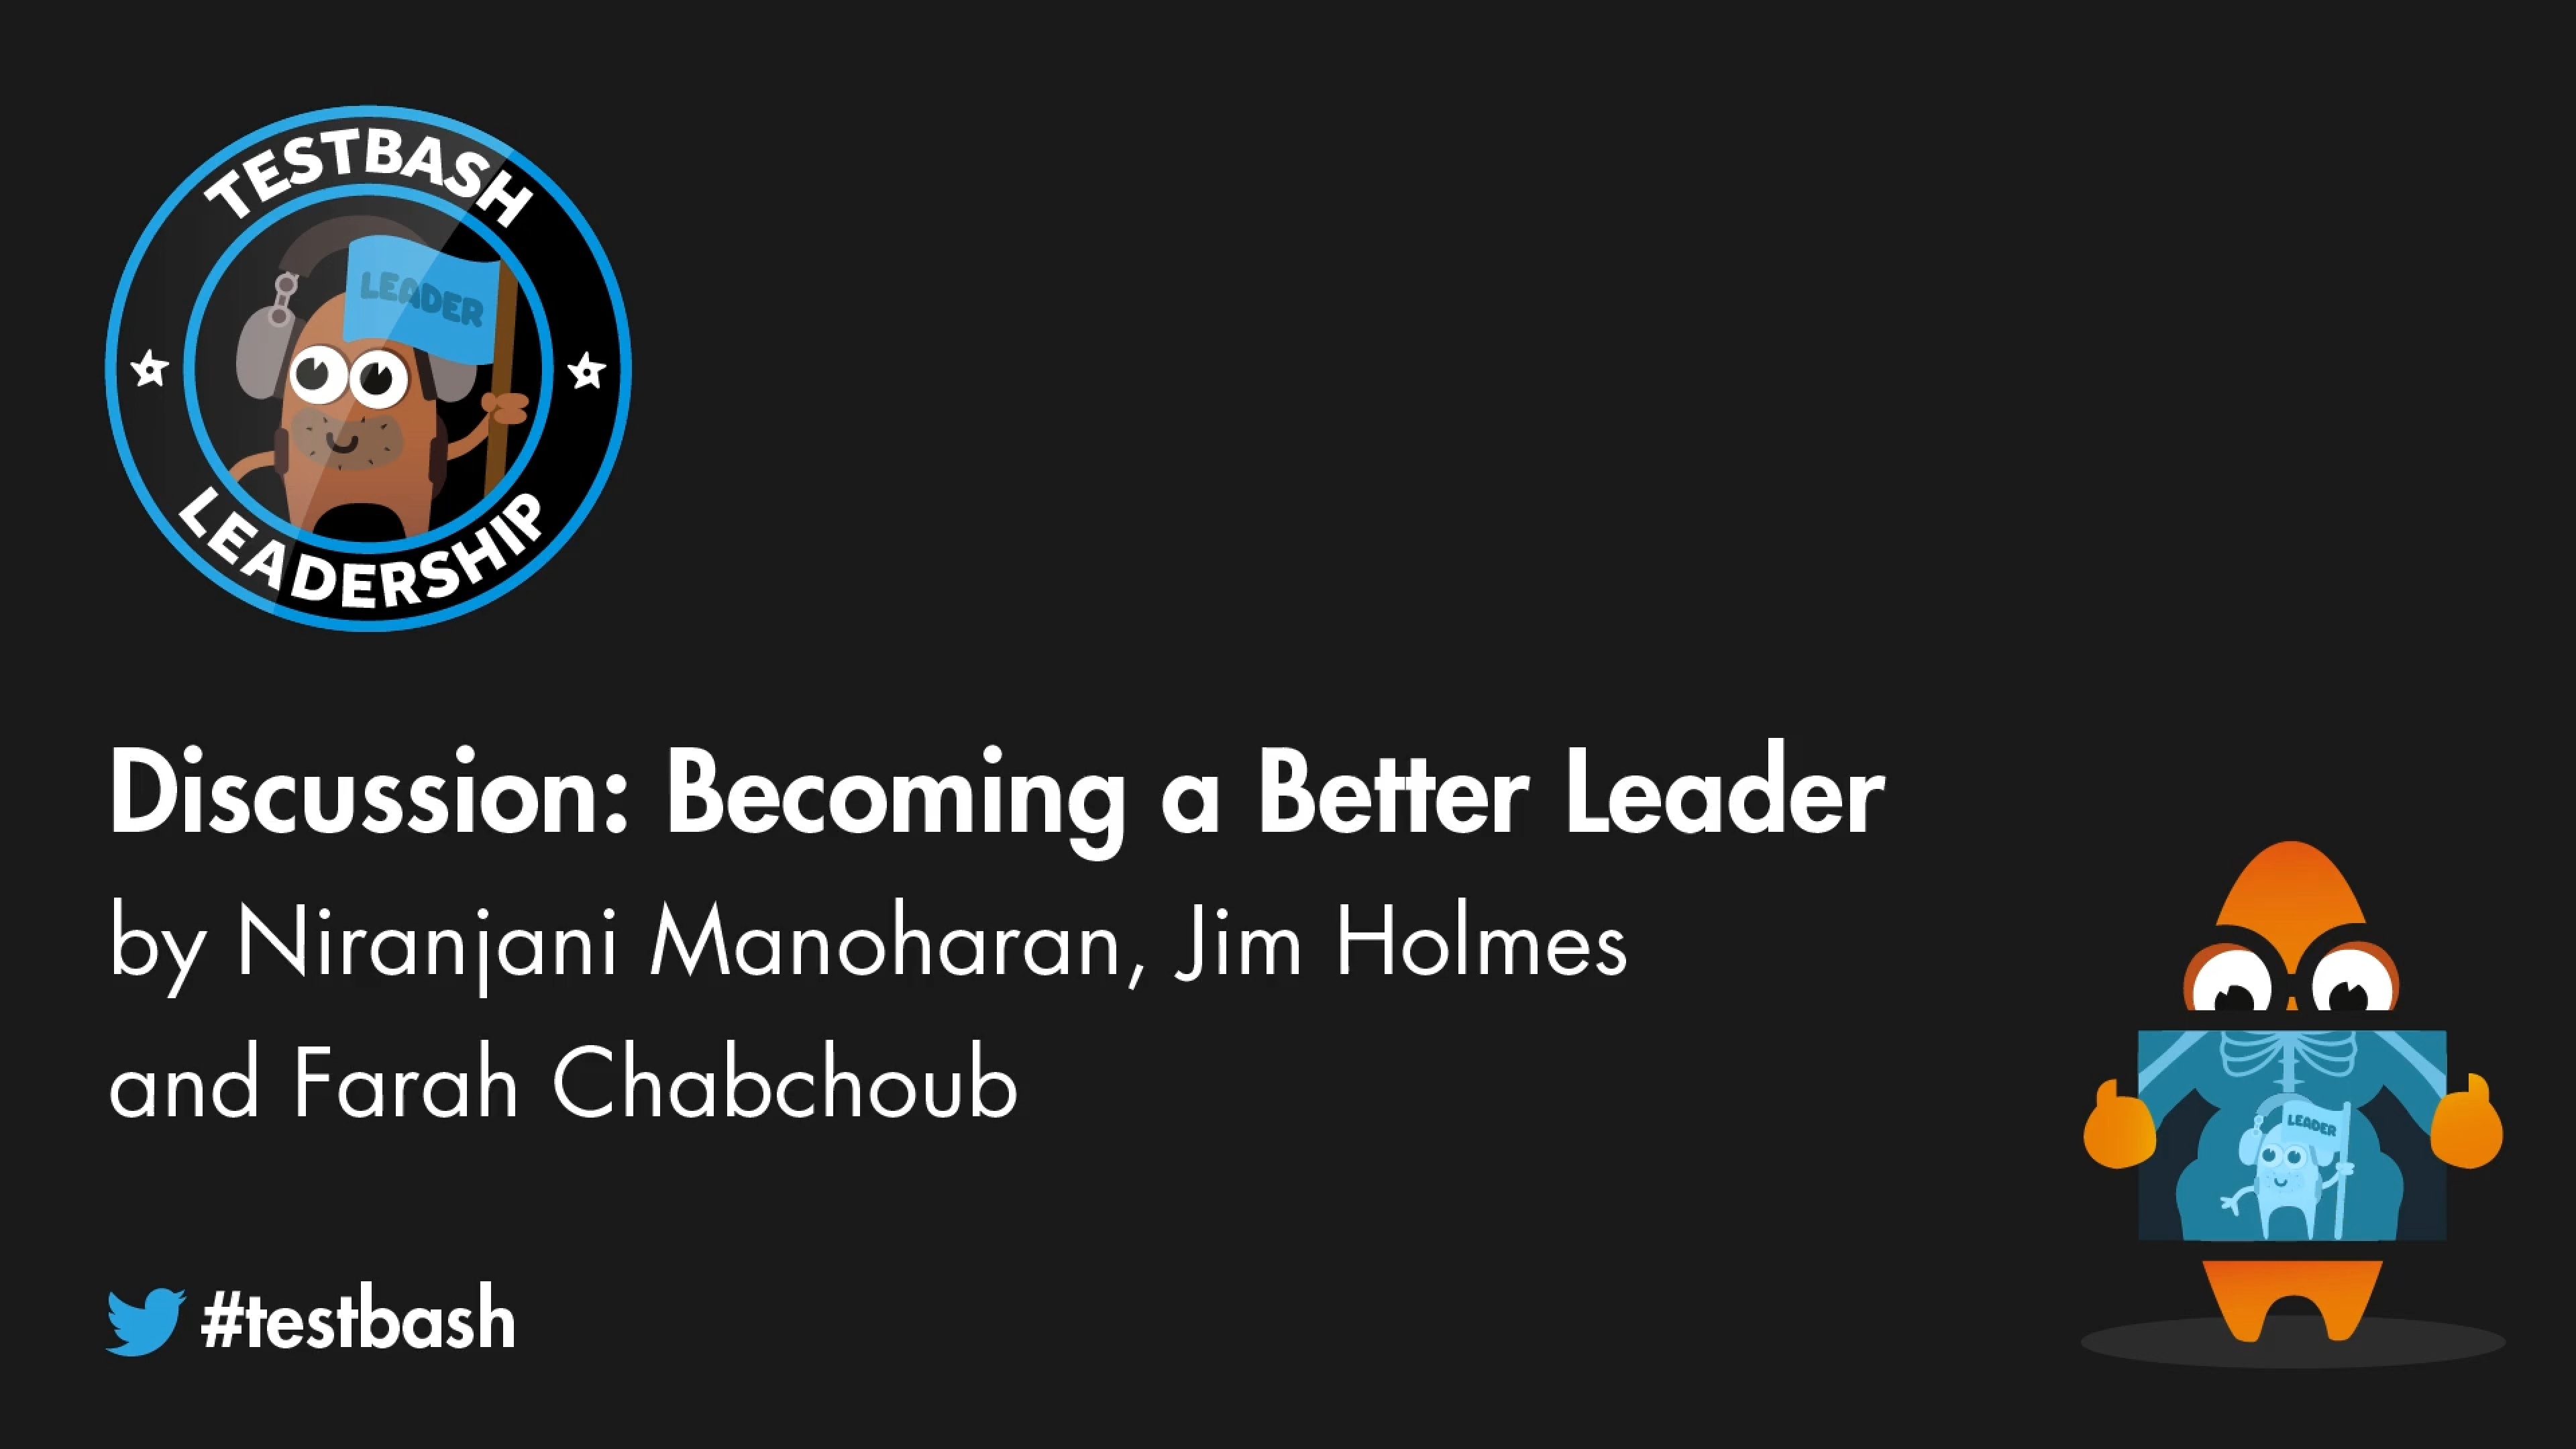 Discussion: Becoming a Better Leader